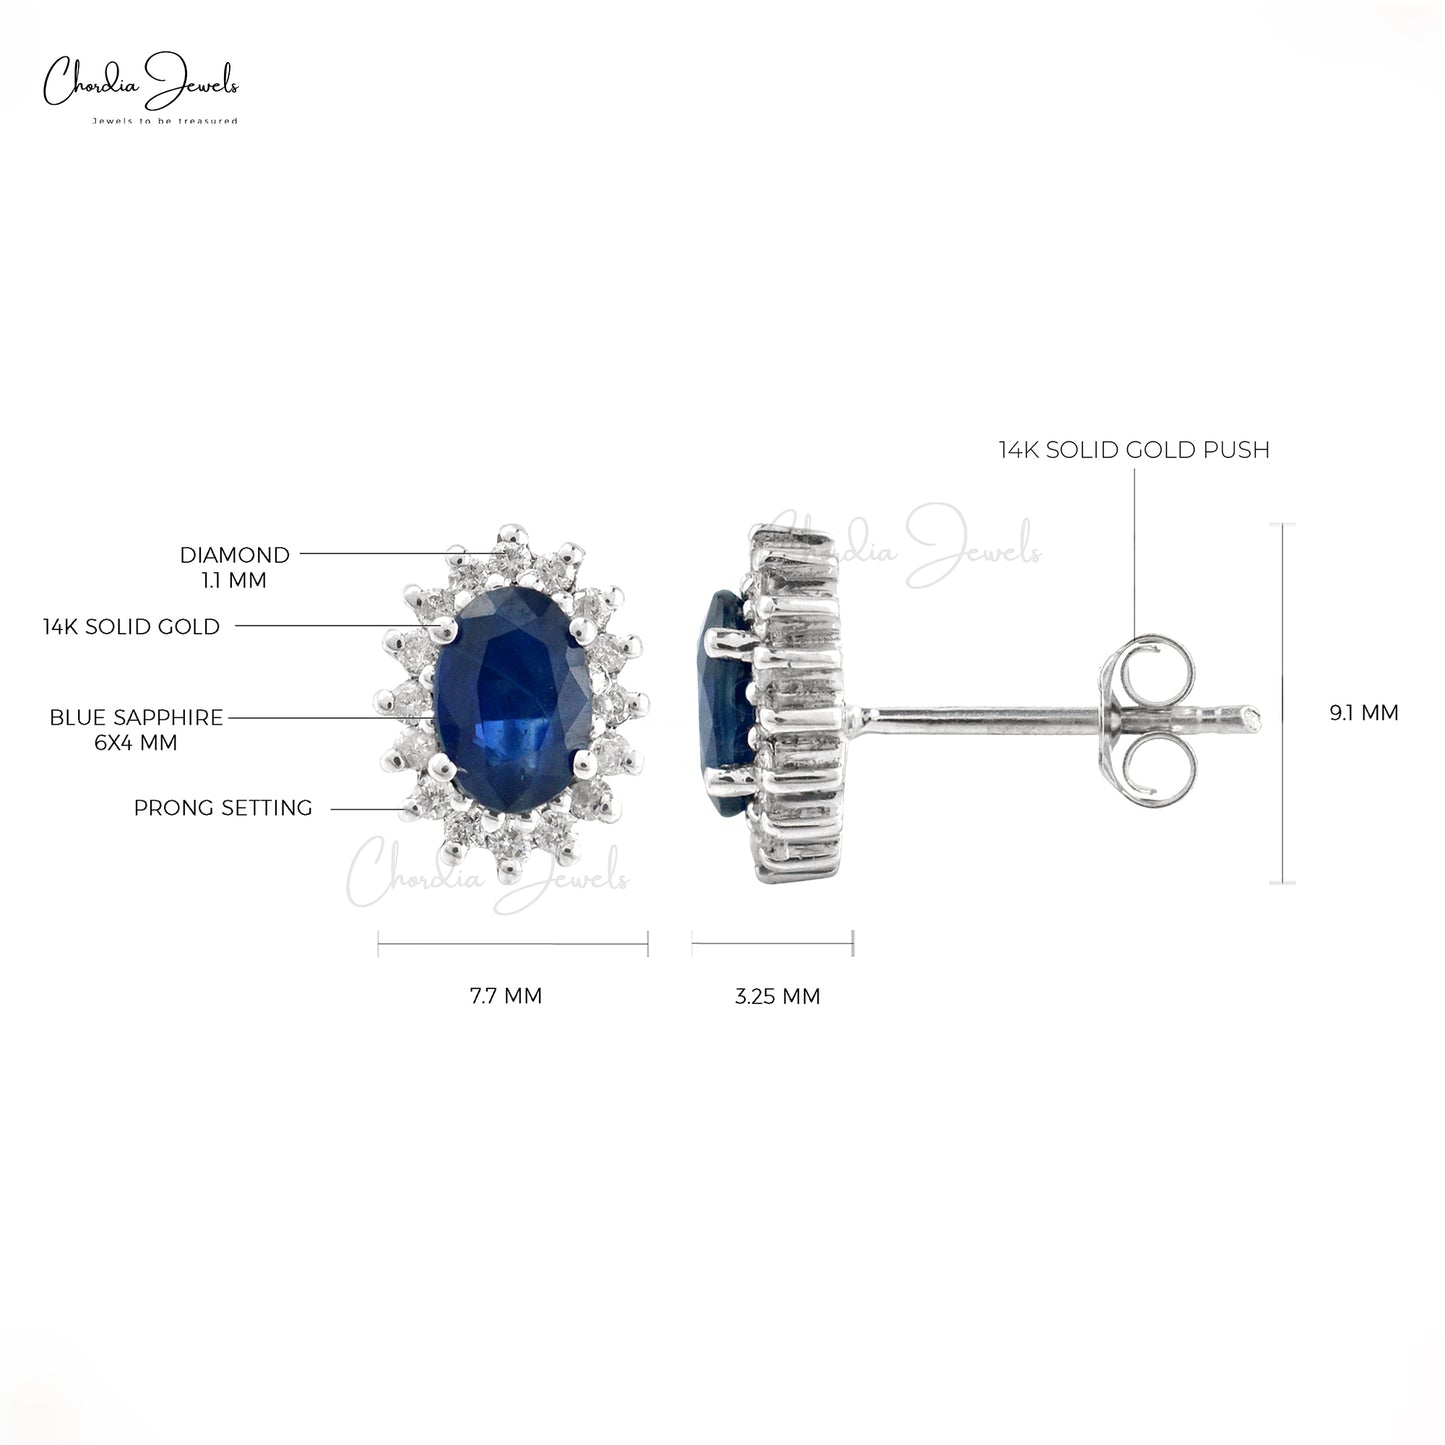 Load image into Gallery viewer, 1.16 Carat Oval Cut Natural  Blue Sapphire Earrings For Anniversary, 14k Solid White Gold Diamond and Gemstone Halo Earrings For Birthday Gift
